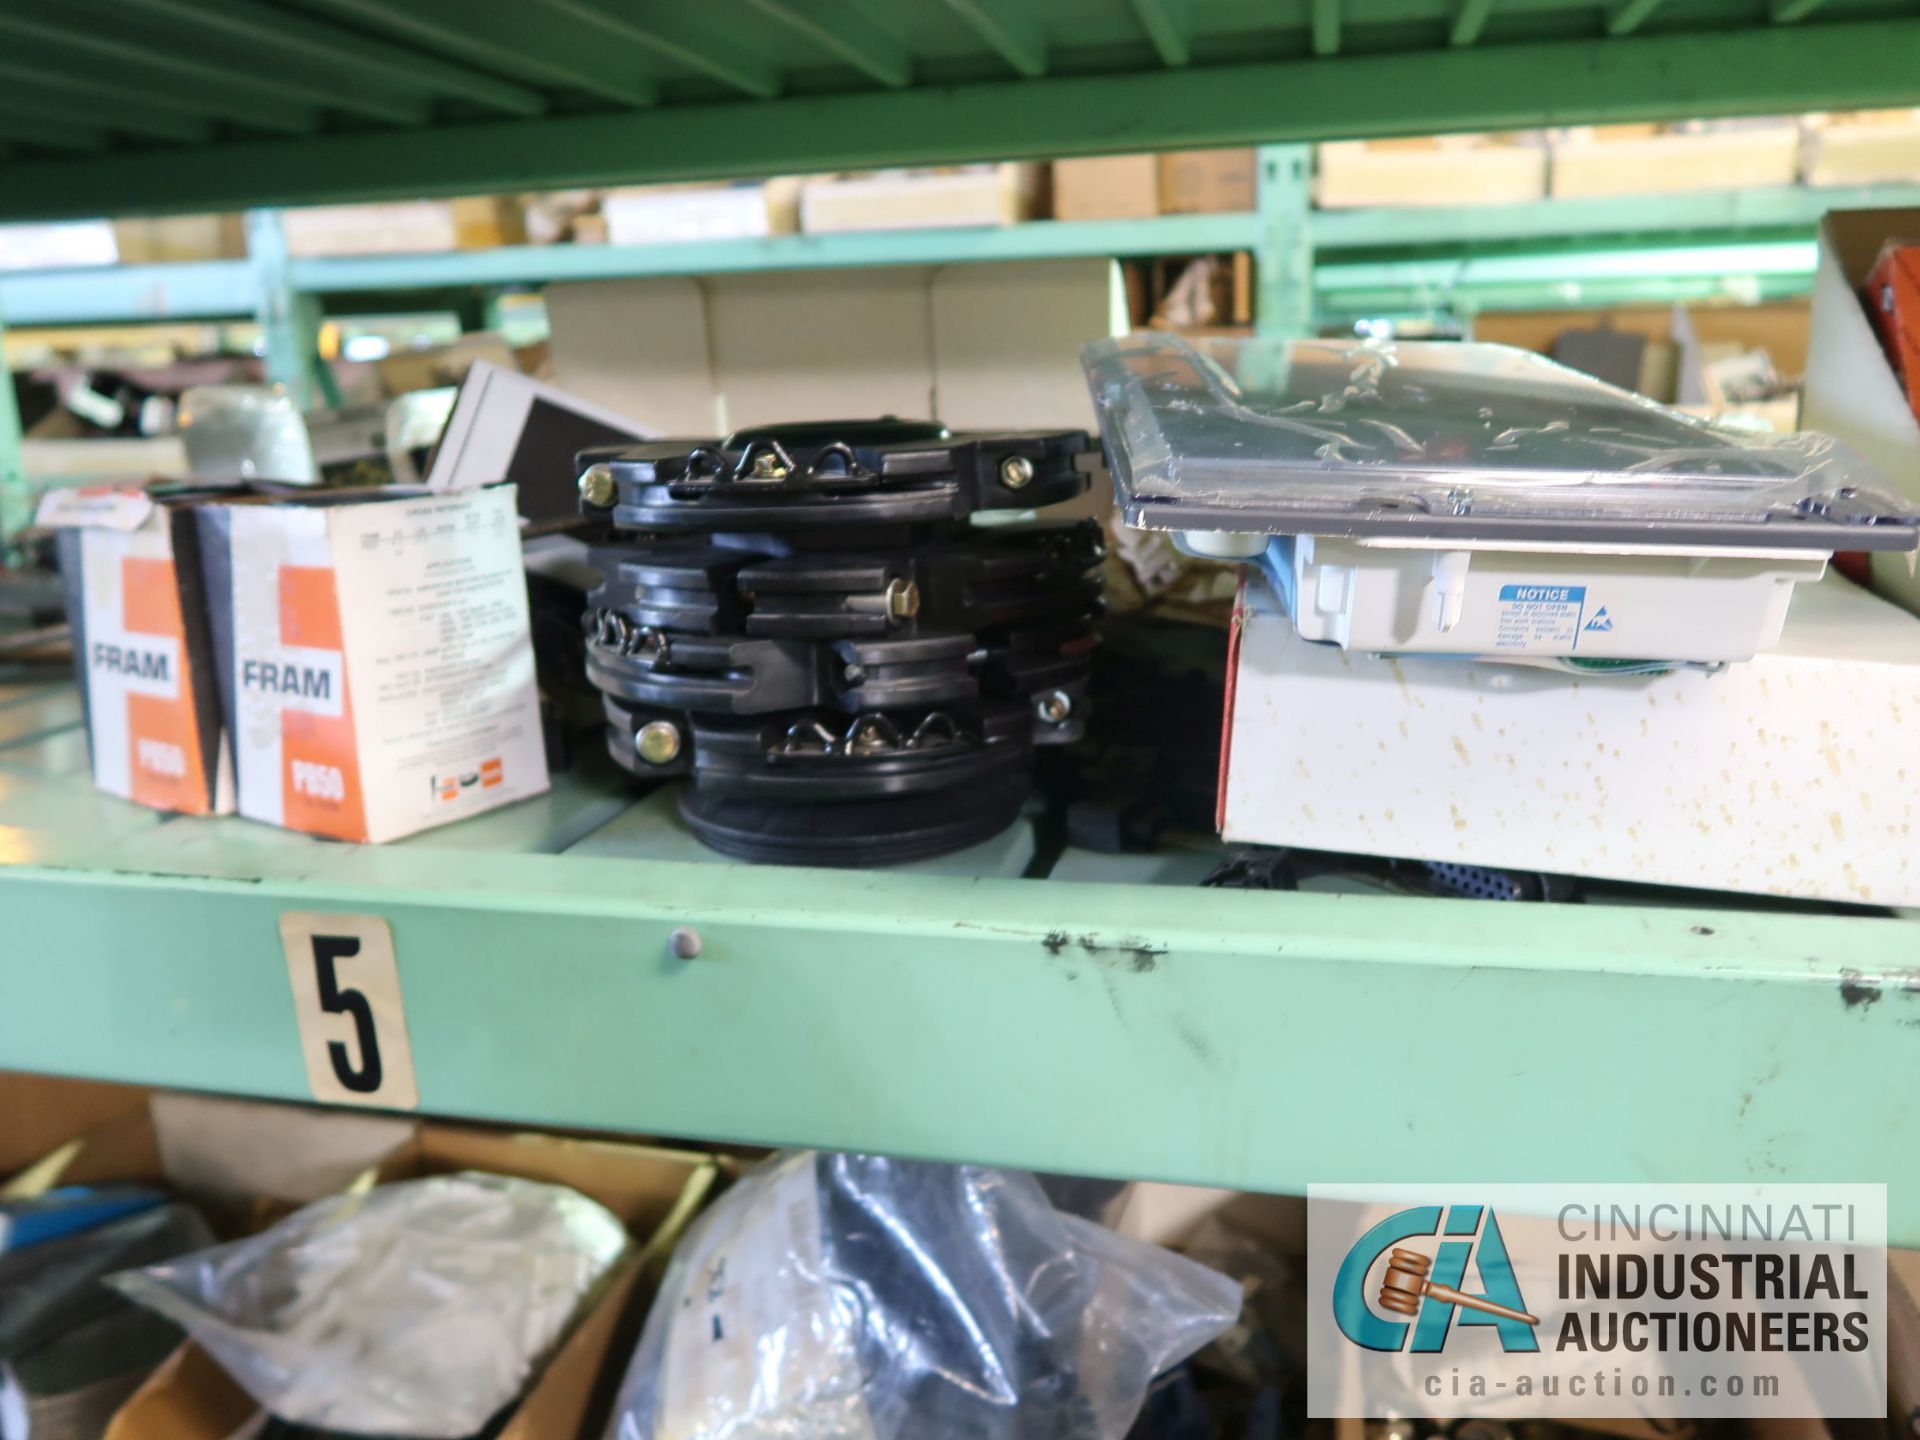 CONTENTS OF (5) RACKS INCLUDING MISCELLANEOUS AUTOMOTIVE PARTS, LIGHTS, FILTERS, ENGINE PARTS, RIMS, - Image 22 of 29